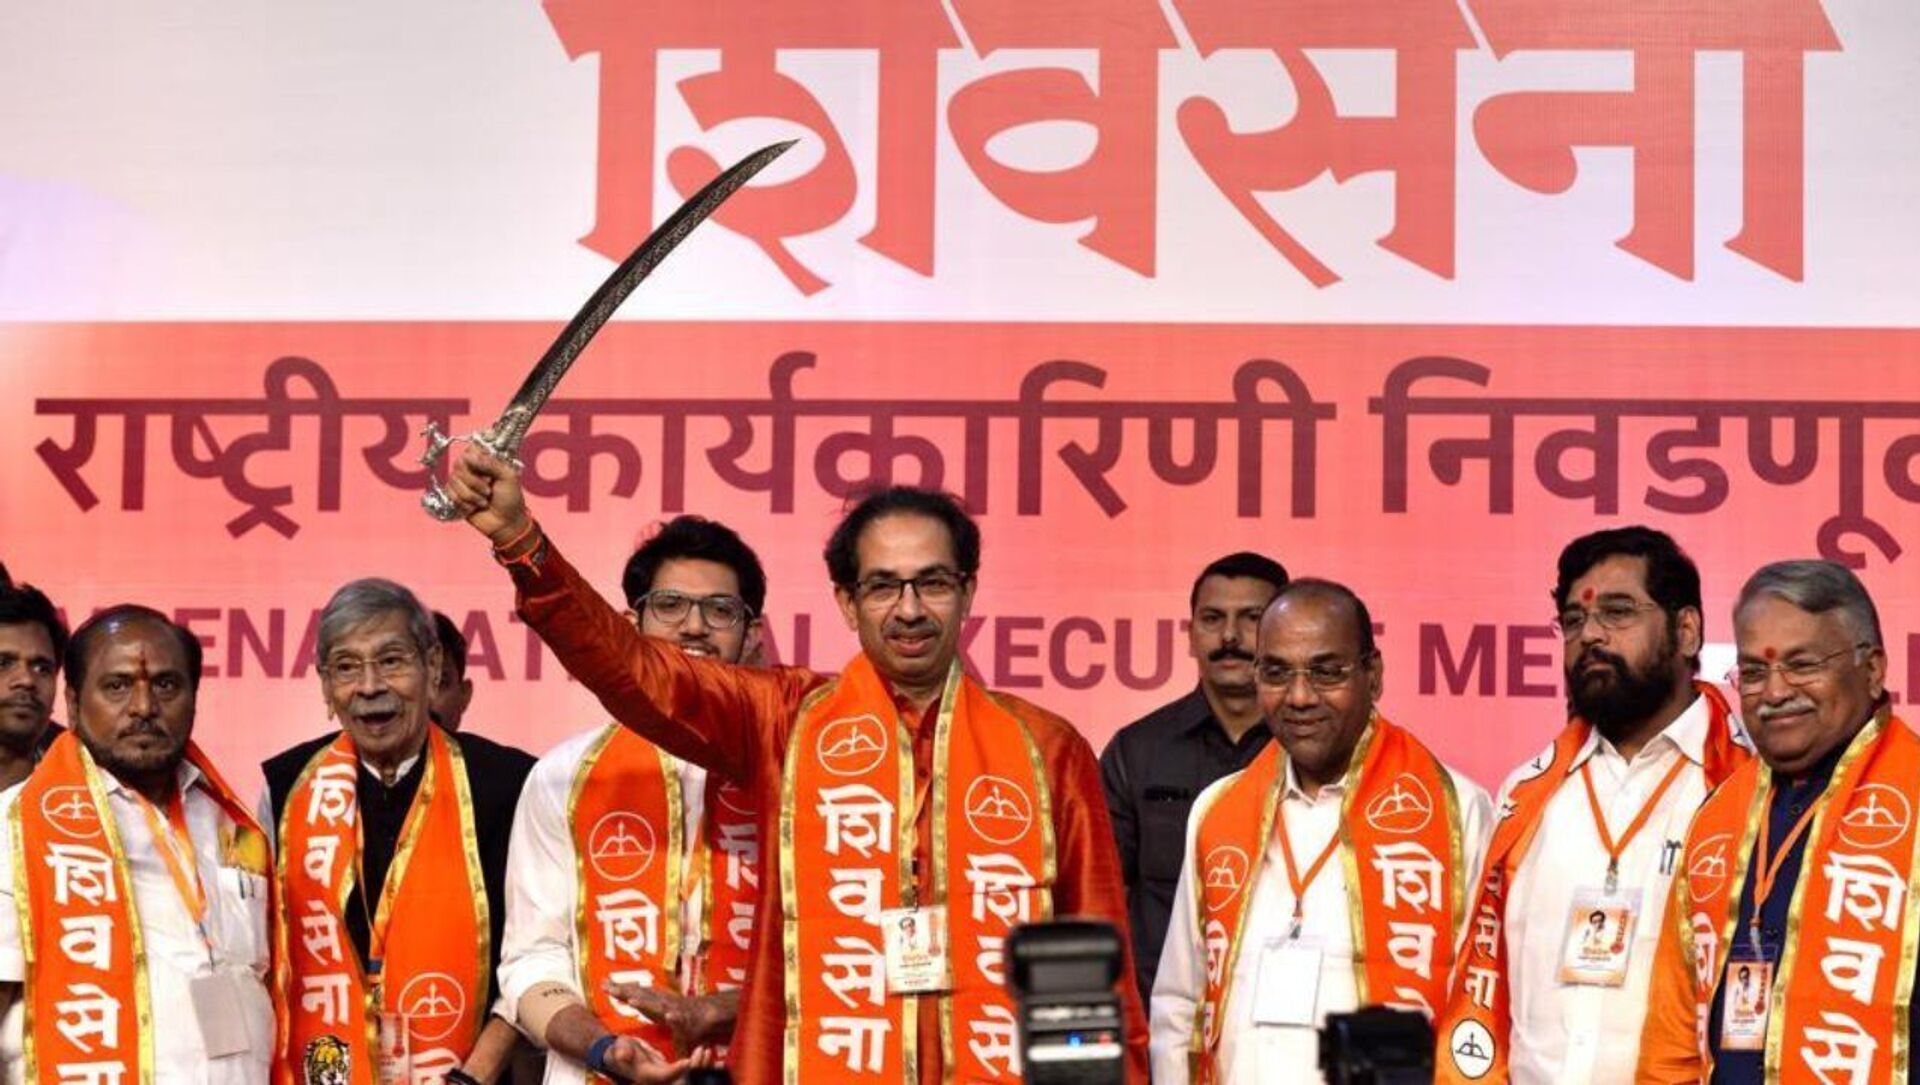 Uddhav Thackeray at the Shiv Sena’s national executive in Mumbai in 2019 when the party said it would go it alone in the Lok Sabha and Maharashtra assembly elections. - Sputnik International, 1920, 23.03.2021